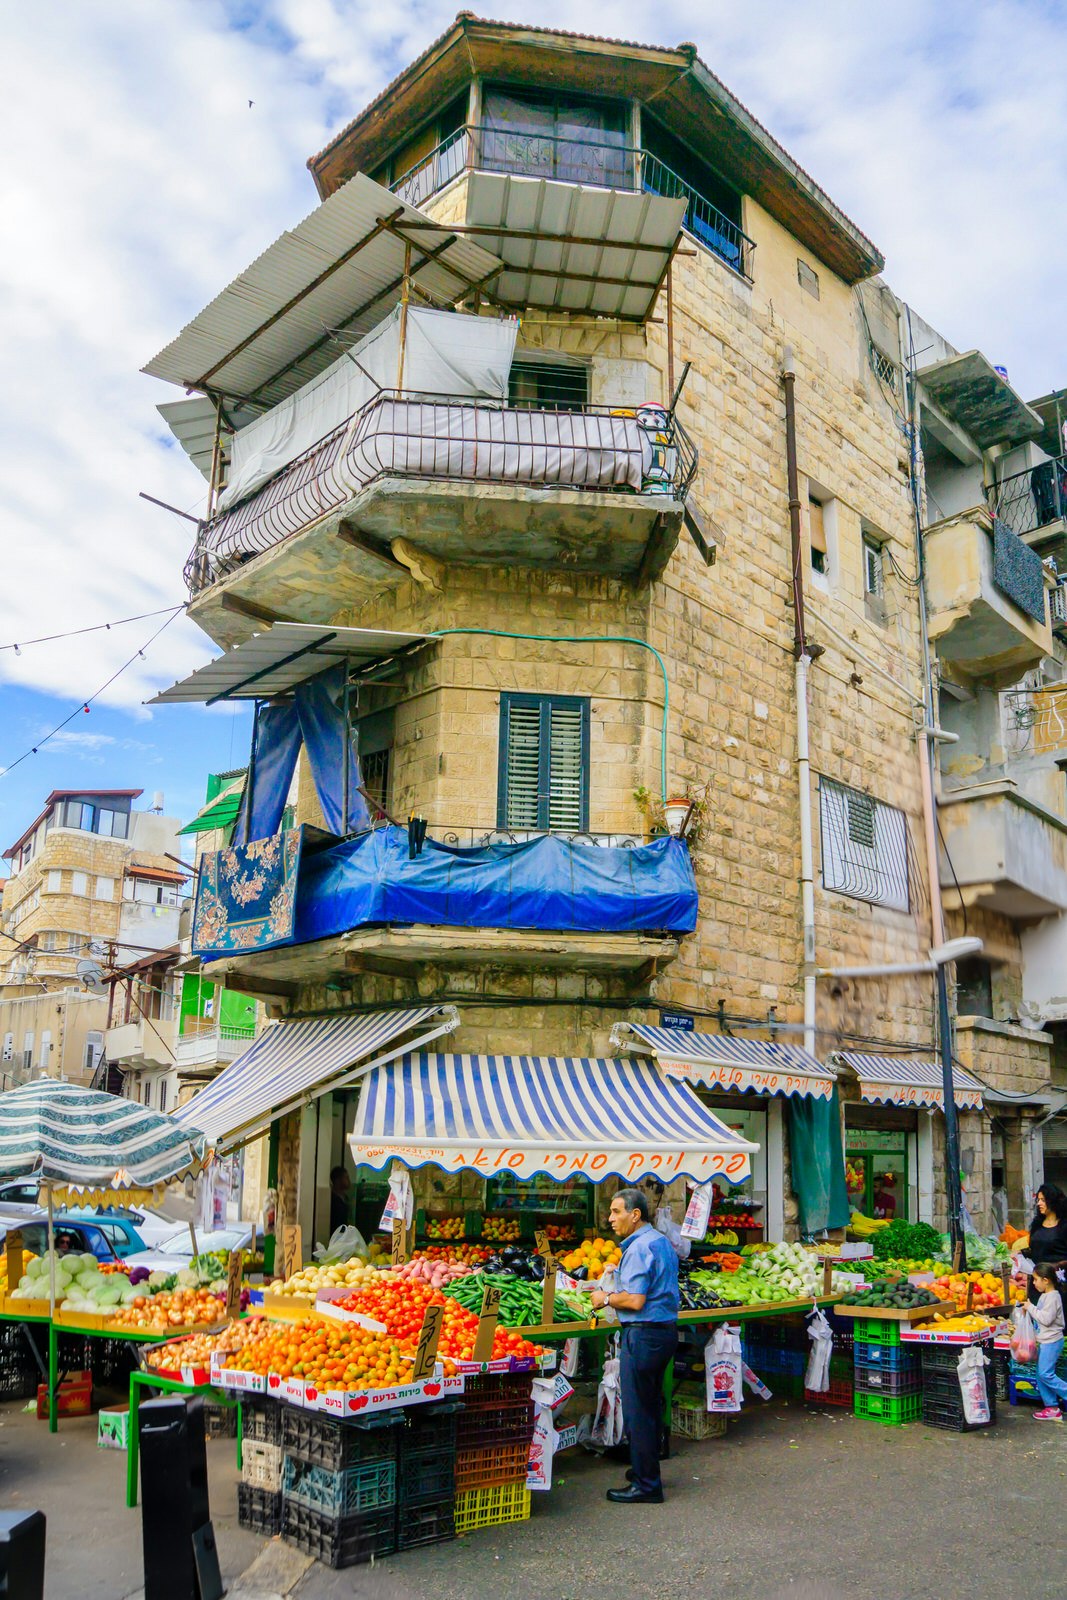 Scene of Wadi Nisnas neighbourhood and its market, with businesses, locals and tourists, in Haifa, Israel © RnDmS / Shutterstock